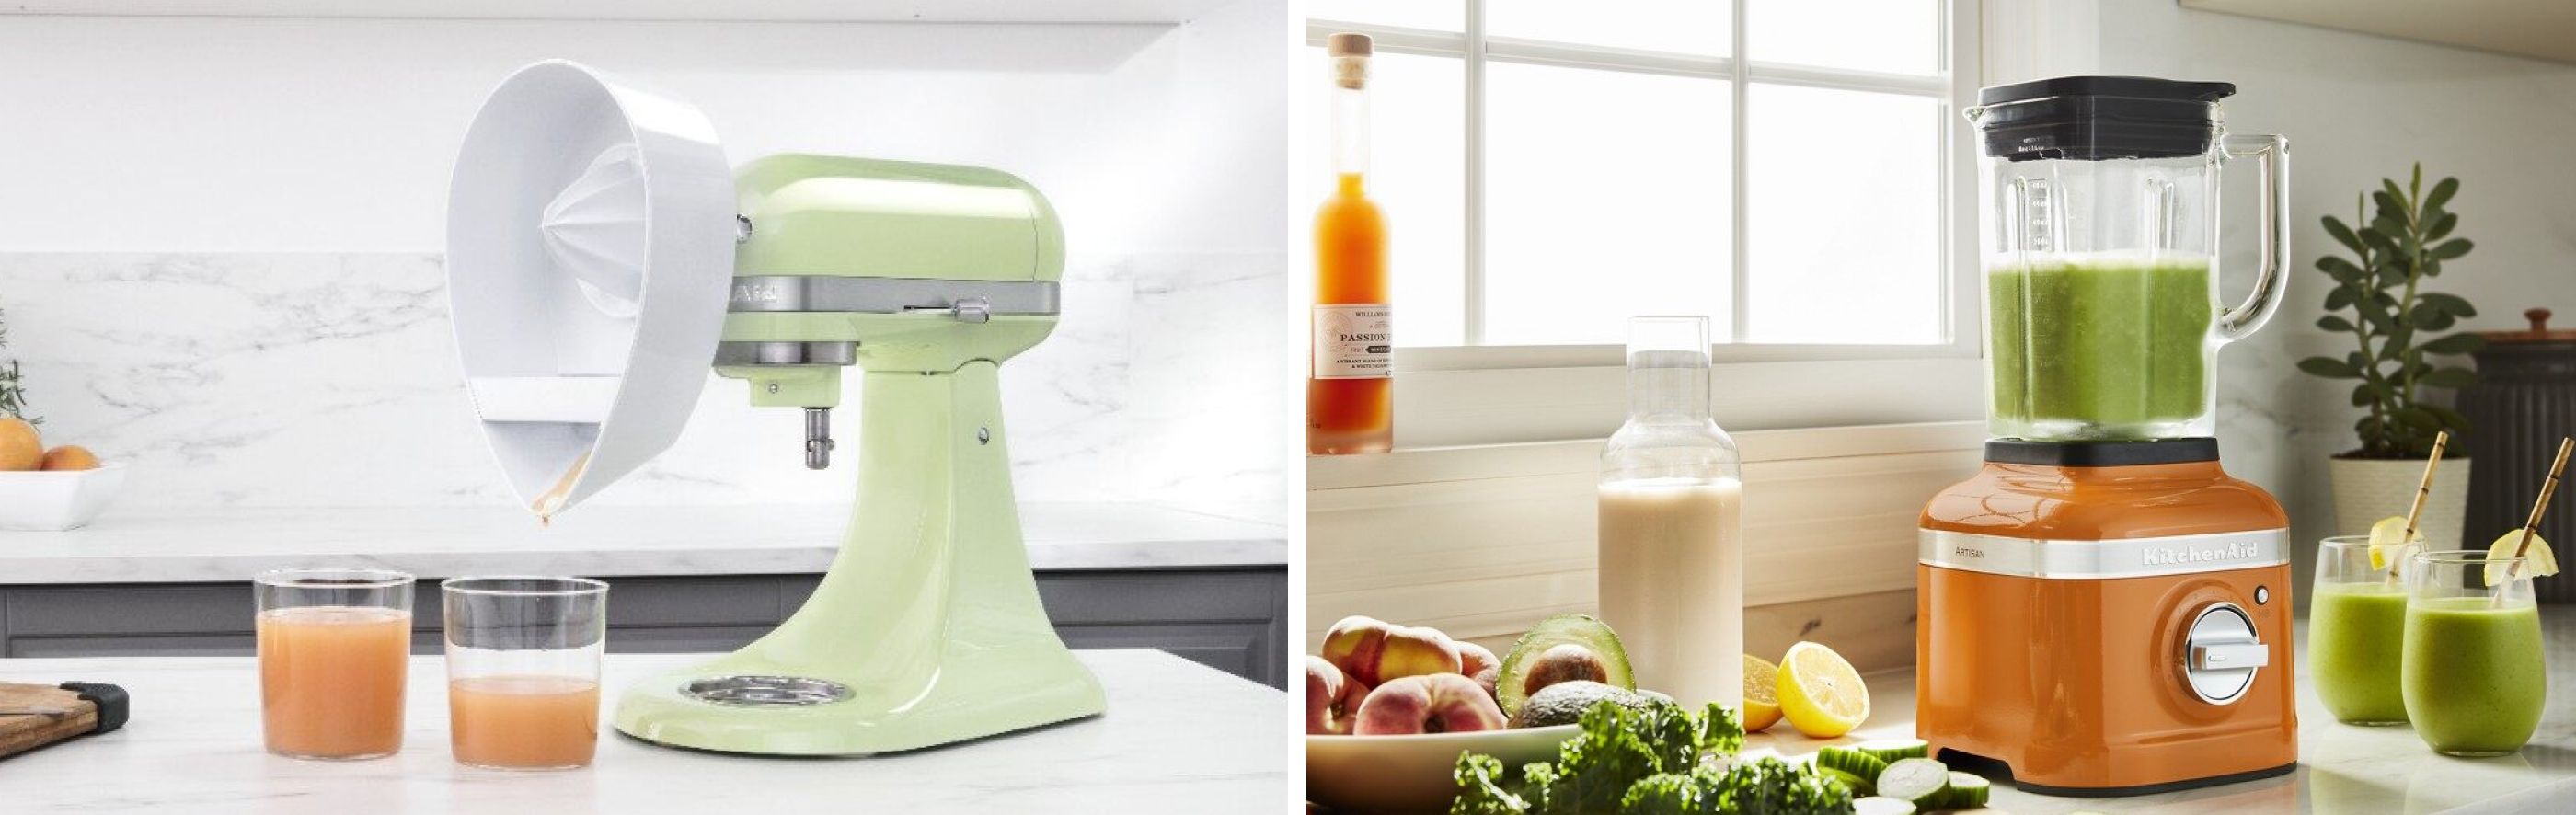 Comparison image of stand mixer with citrus juicer attachment and blender.